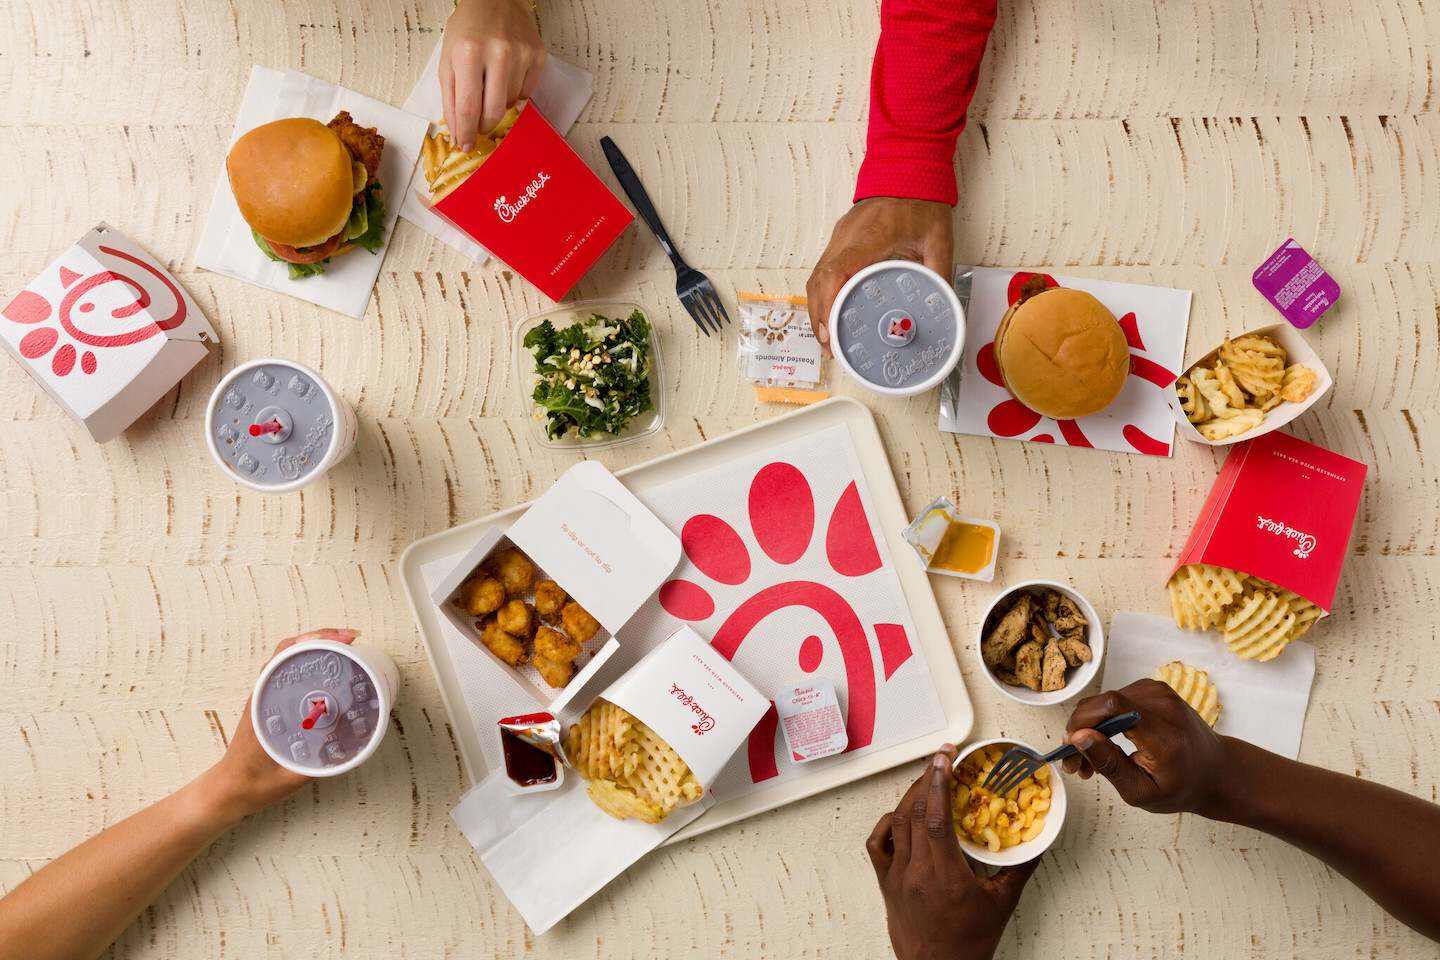 Chick-fil-A sandwiches, nuggets, sides, sauces and drinks on a white table with a white tray in the center.